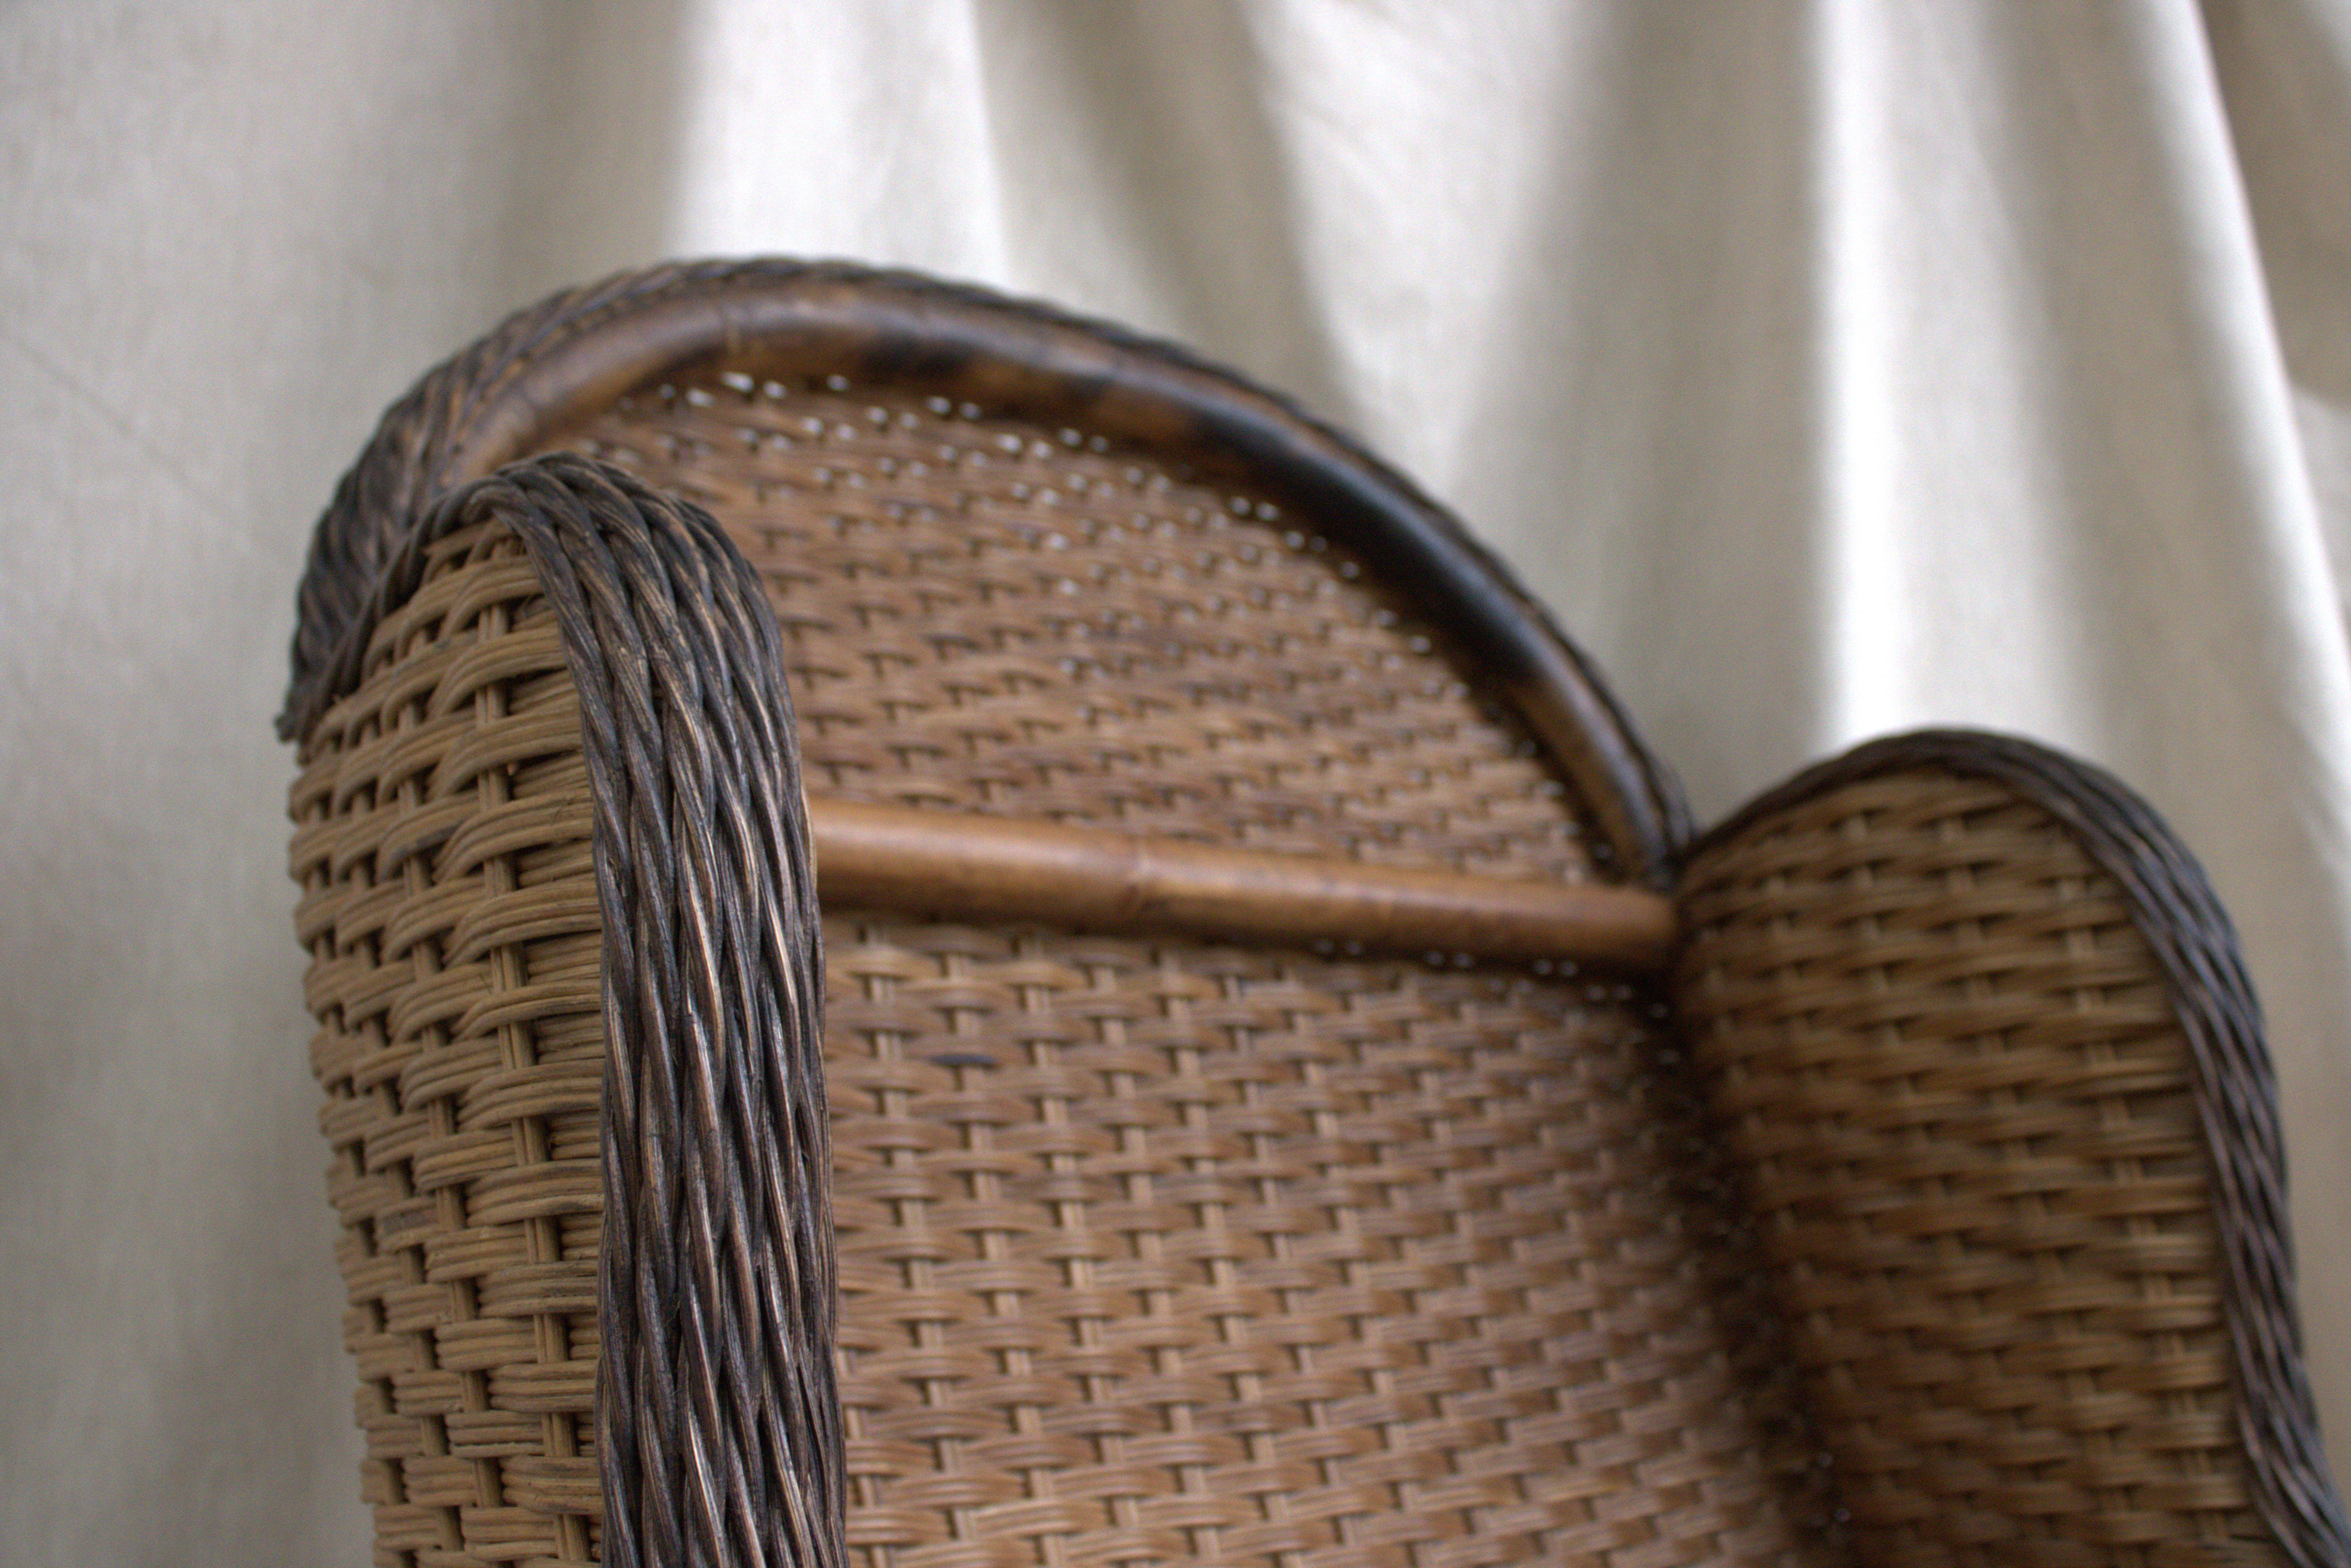 Rattan Straw Weaved Wickered Arm Chair with clamshell details carved on fine wood accents.

With the evidence denoted of the Clamshell carved wooden details we are strongly inclined for the Italianate Influence and possibly origin of this fine